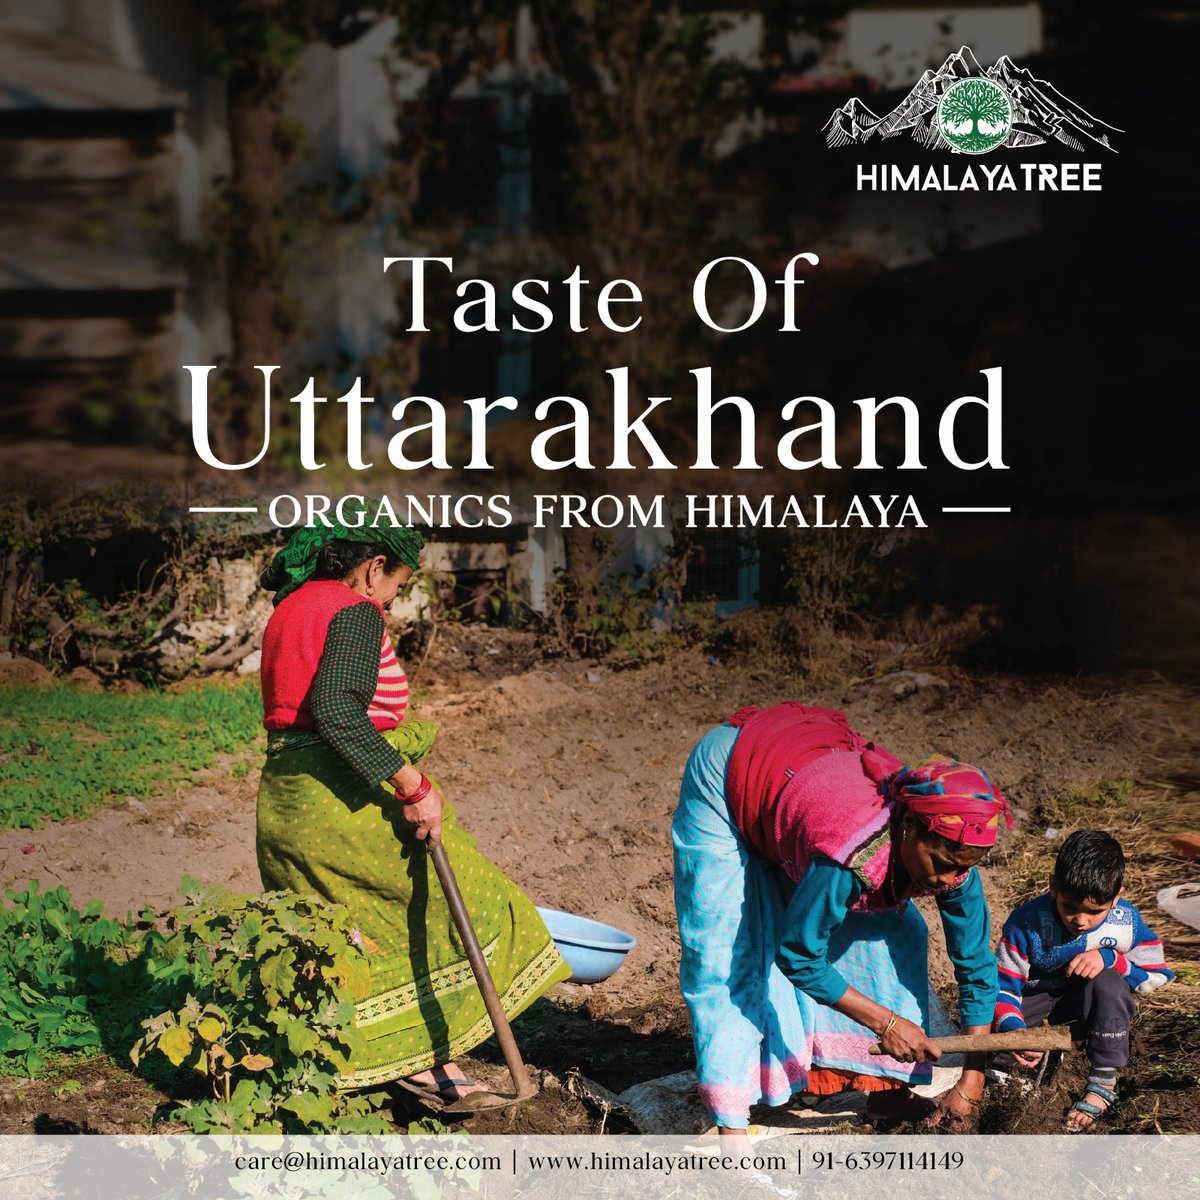 Let's join hands together to uplift living standard of people in the Himalayan region of Uttarakhand.

Eat Well, Be Well.

#ruraldevelopment #society #community #vocalforlocal #organicsfromhimalaya #organichoney #organicgreentea #greentea #healthylifestyle #healthyfood #health